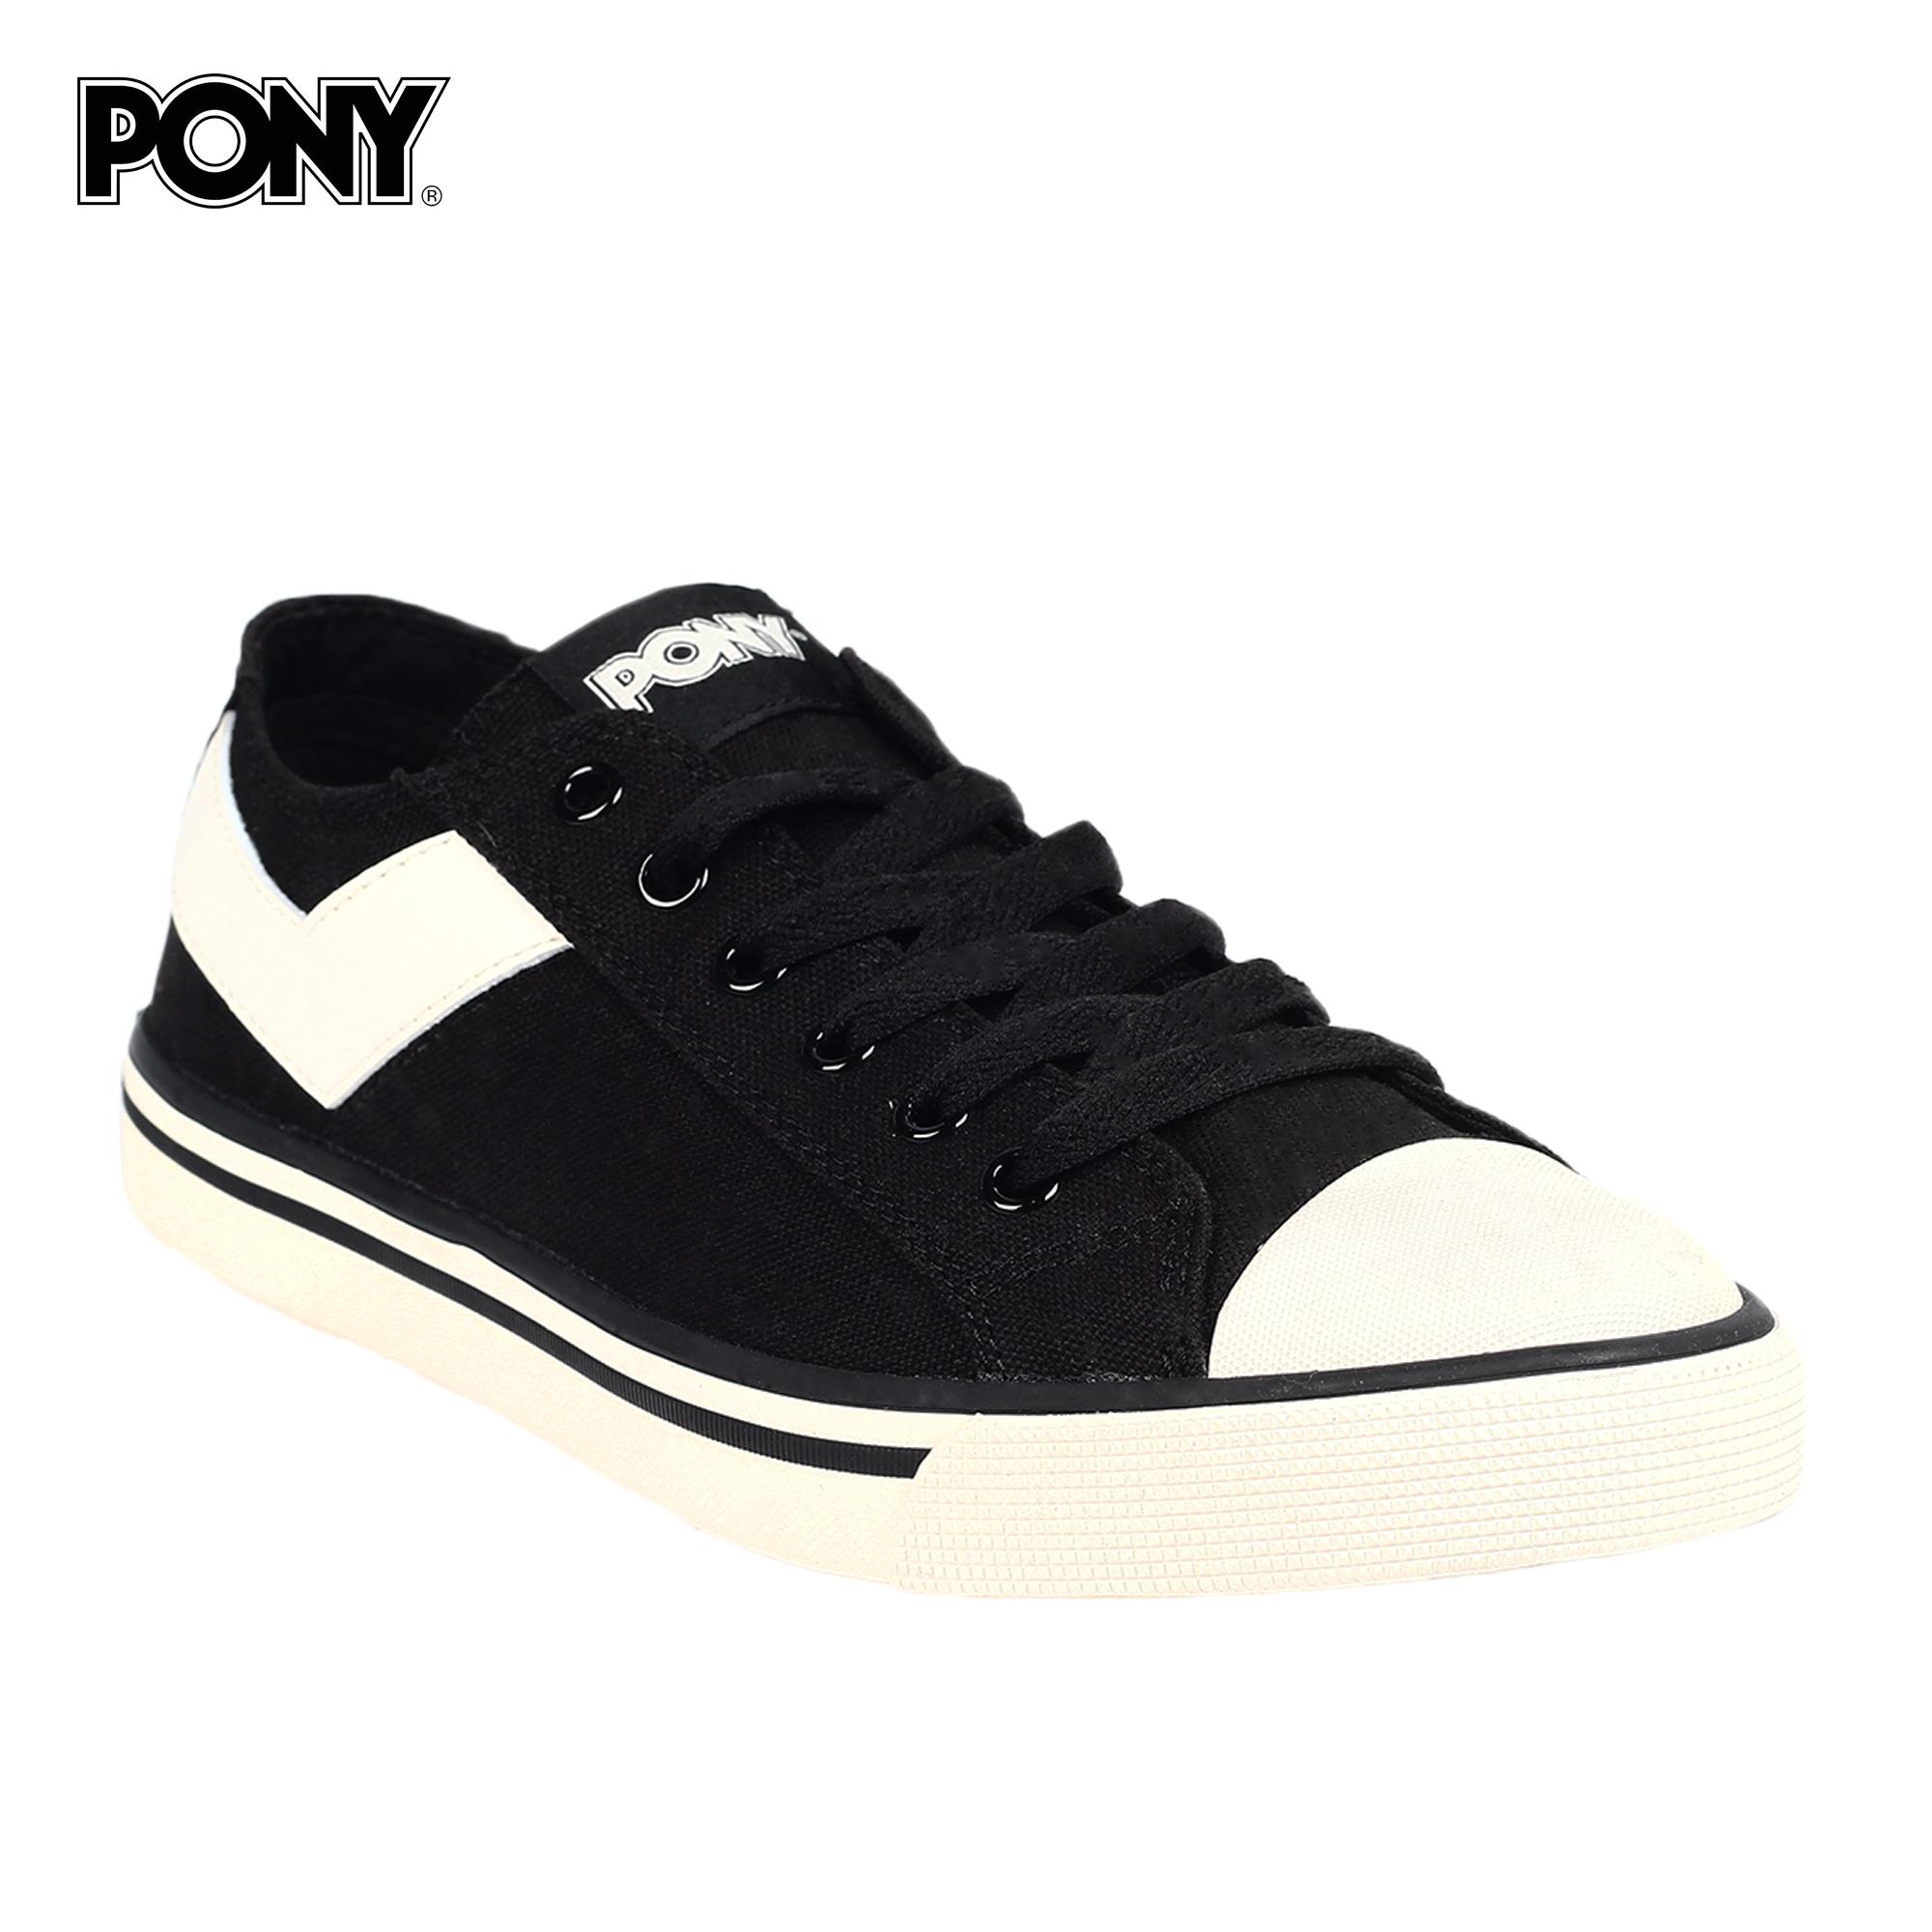 where can i buy pony shoes